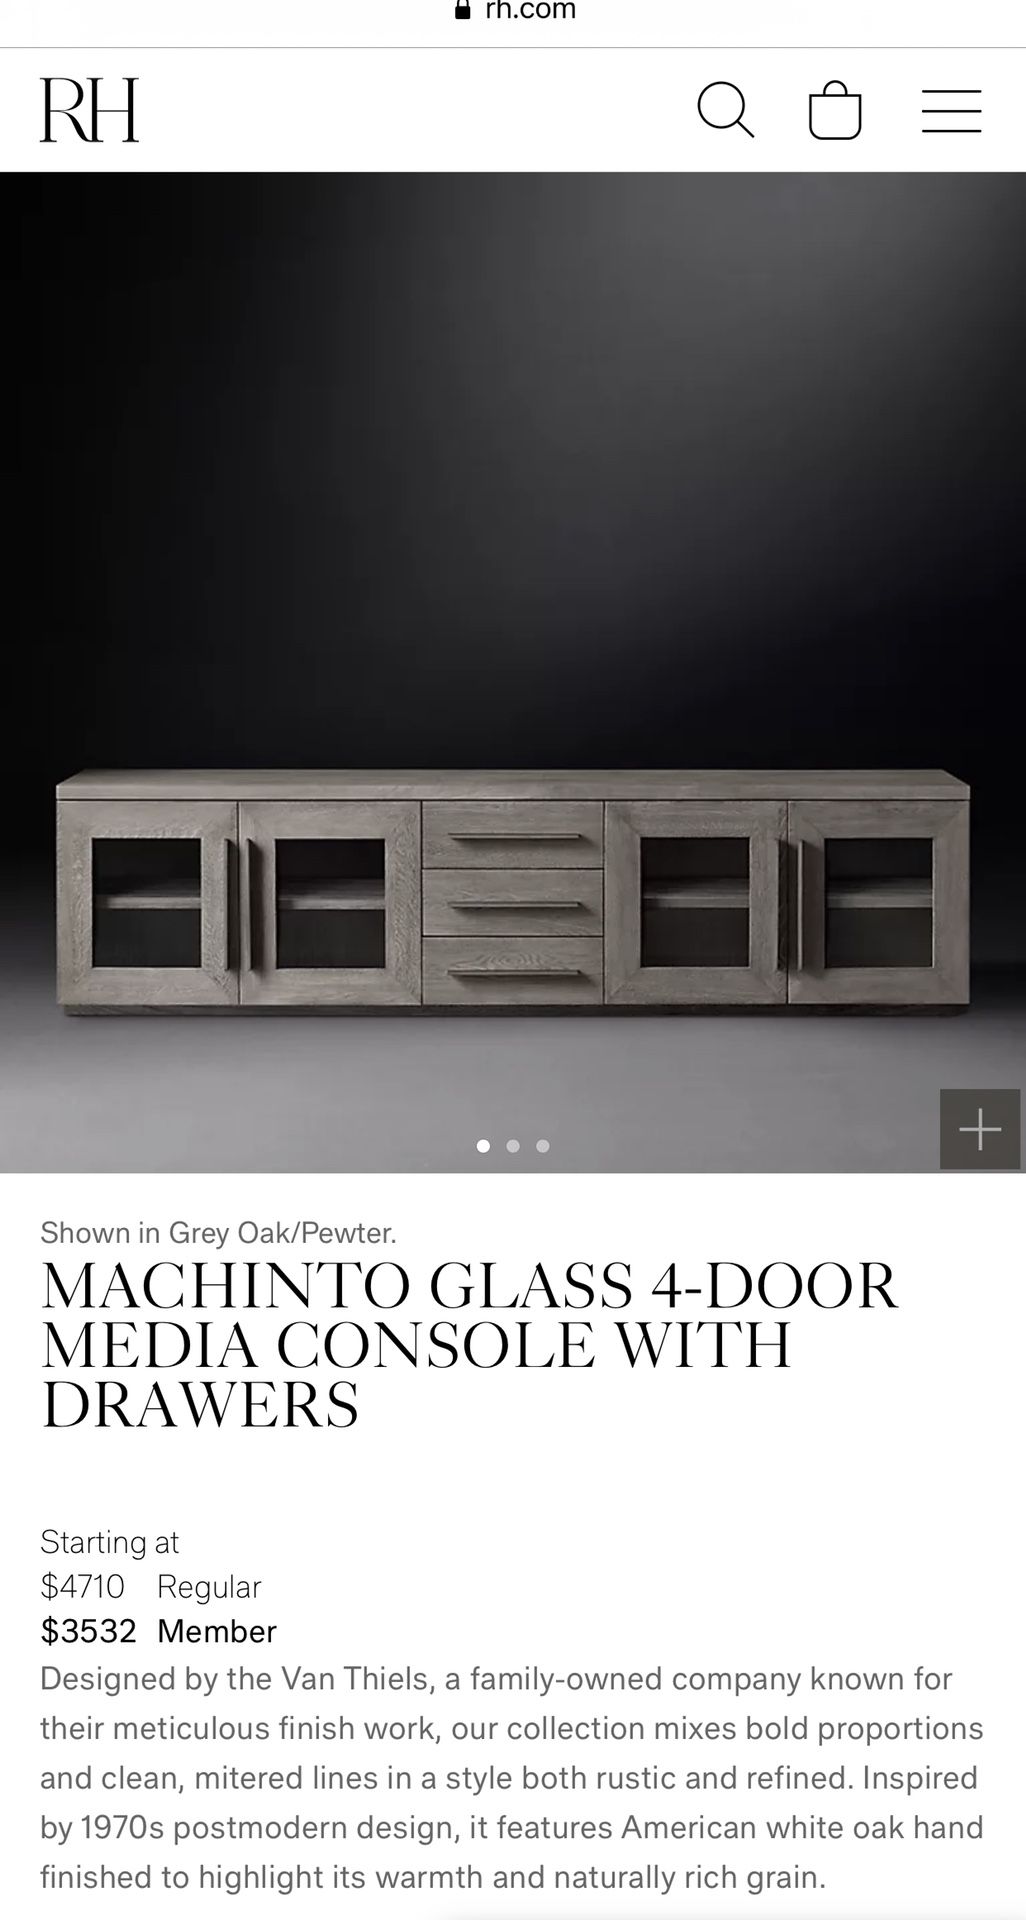 RH Restoration Hardware MACHINTO GLASS 4-DOOR MEDIA CONSOLE WITH DRAWERS